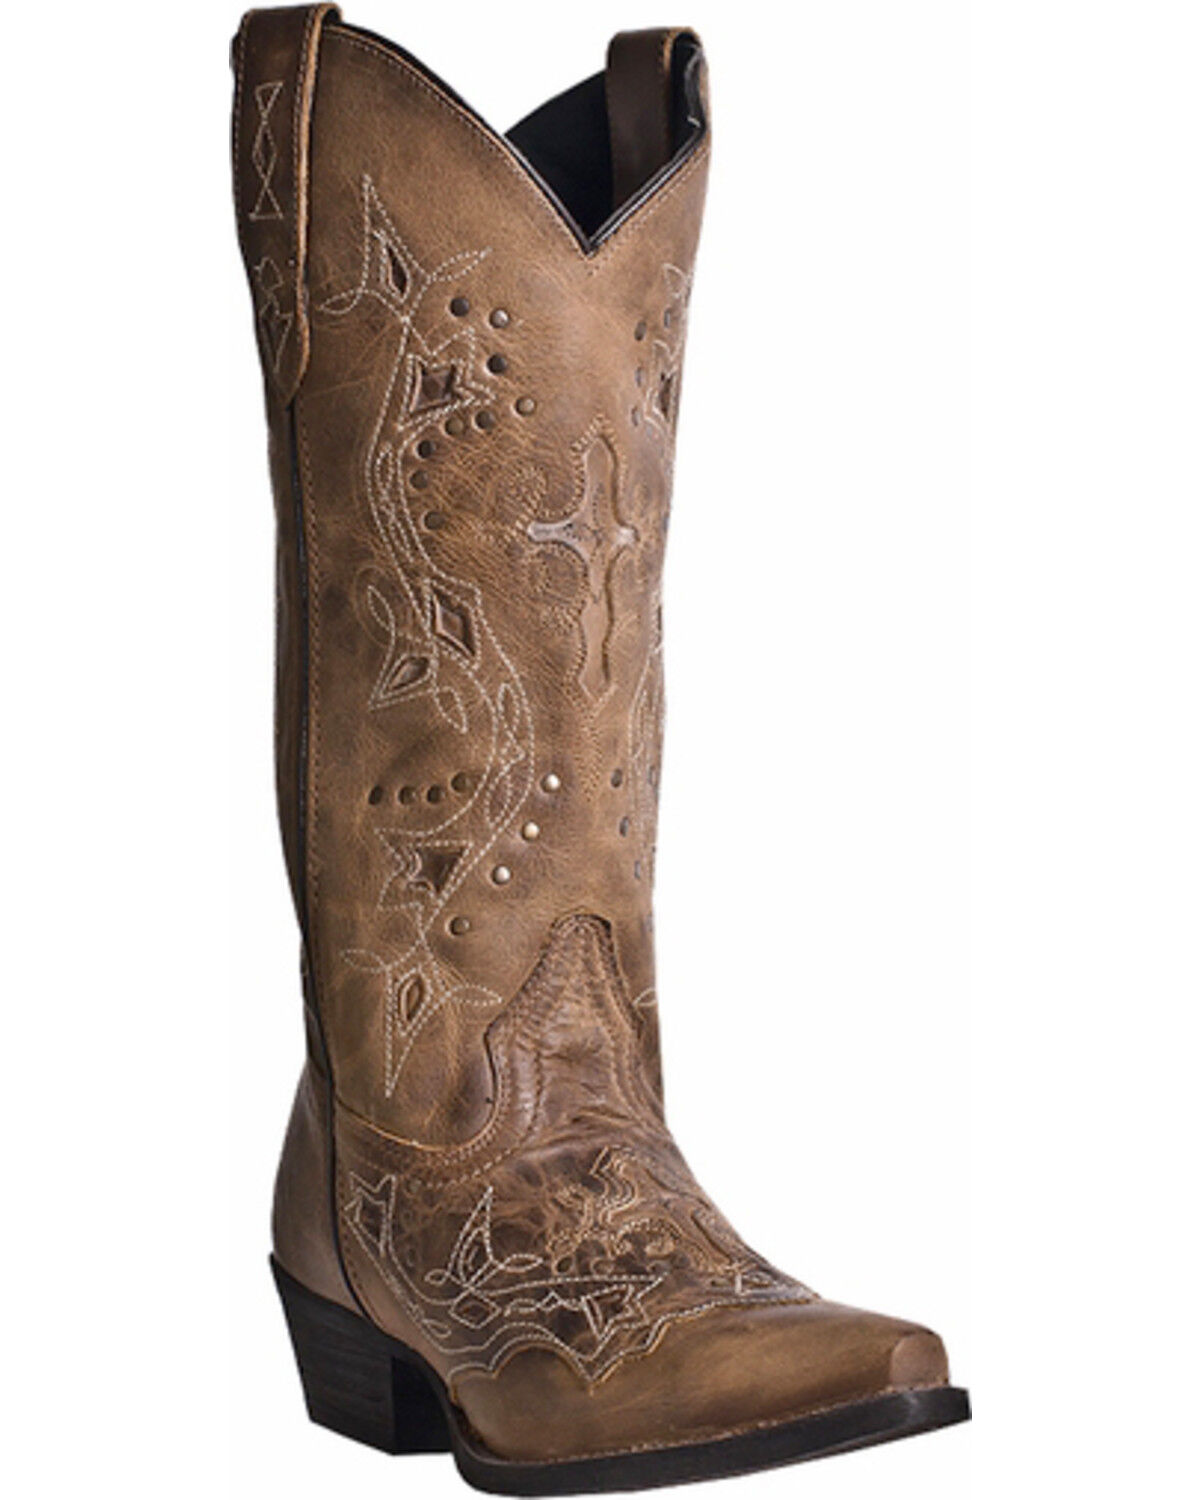 Laredo Cross Point Cowgirl Boots - Snip 